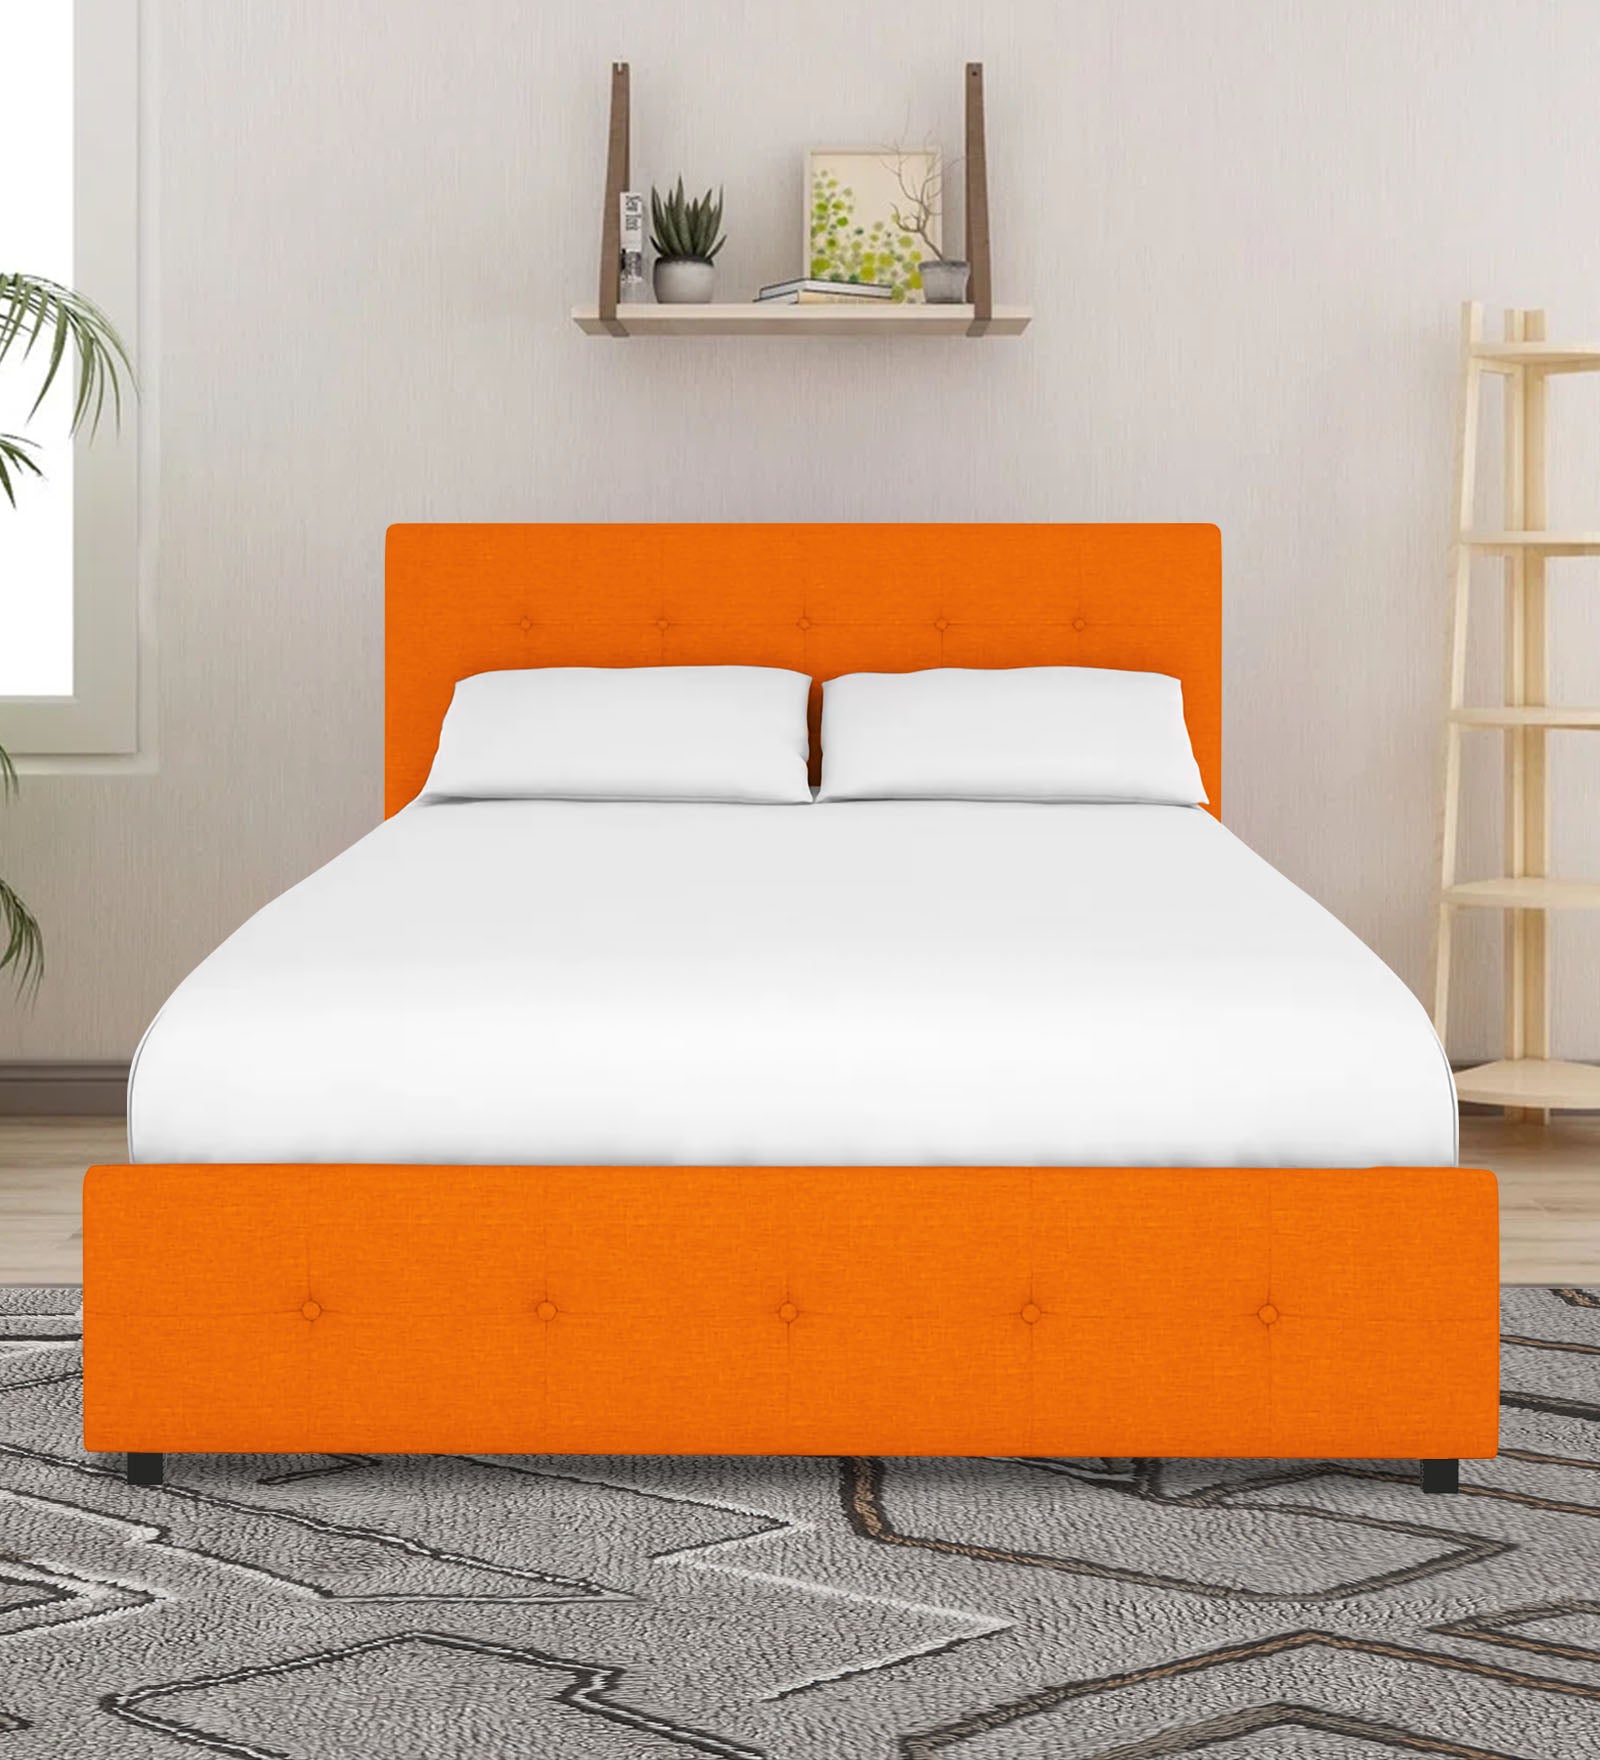 Lido Fabric Queen Size Bed In Vivid Orange Colour With Storage